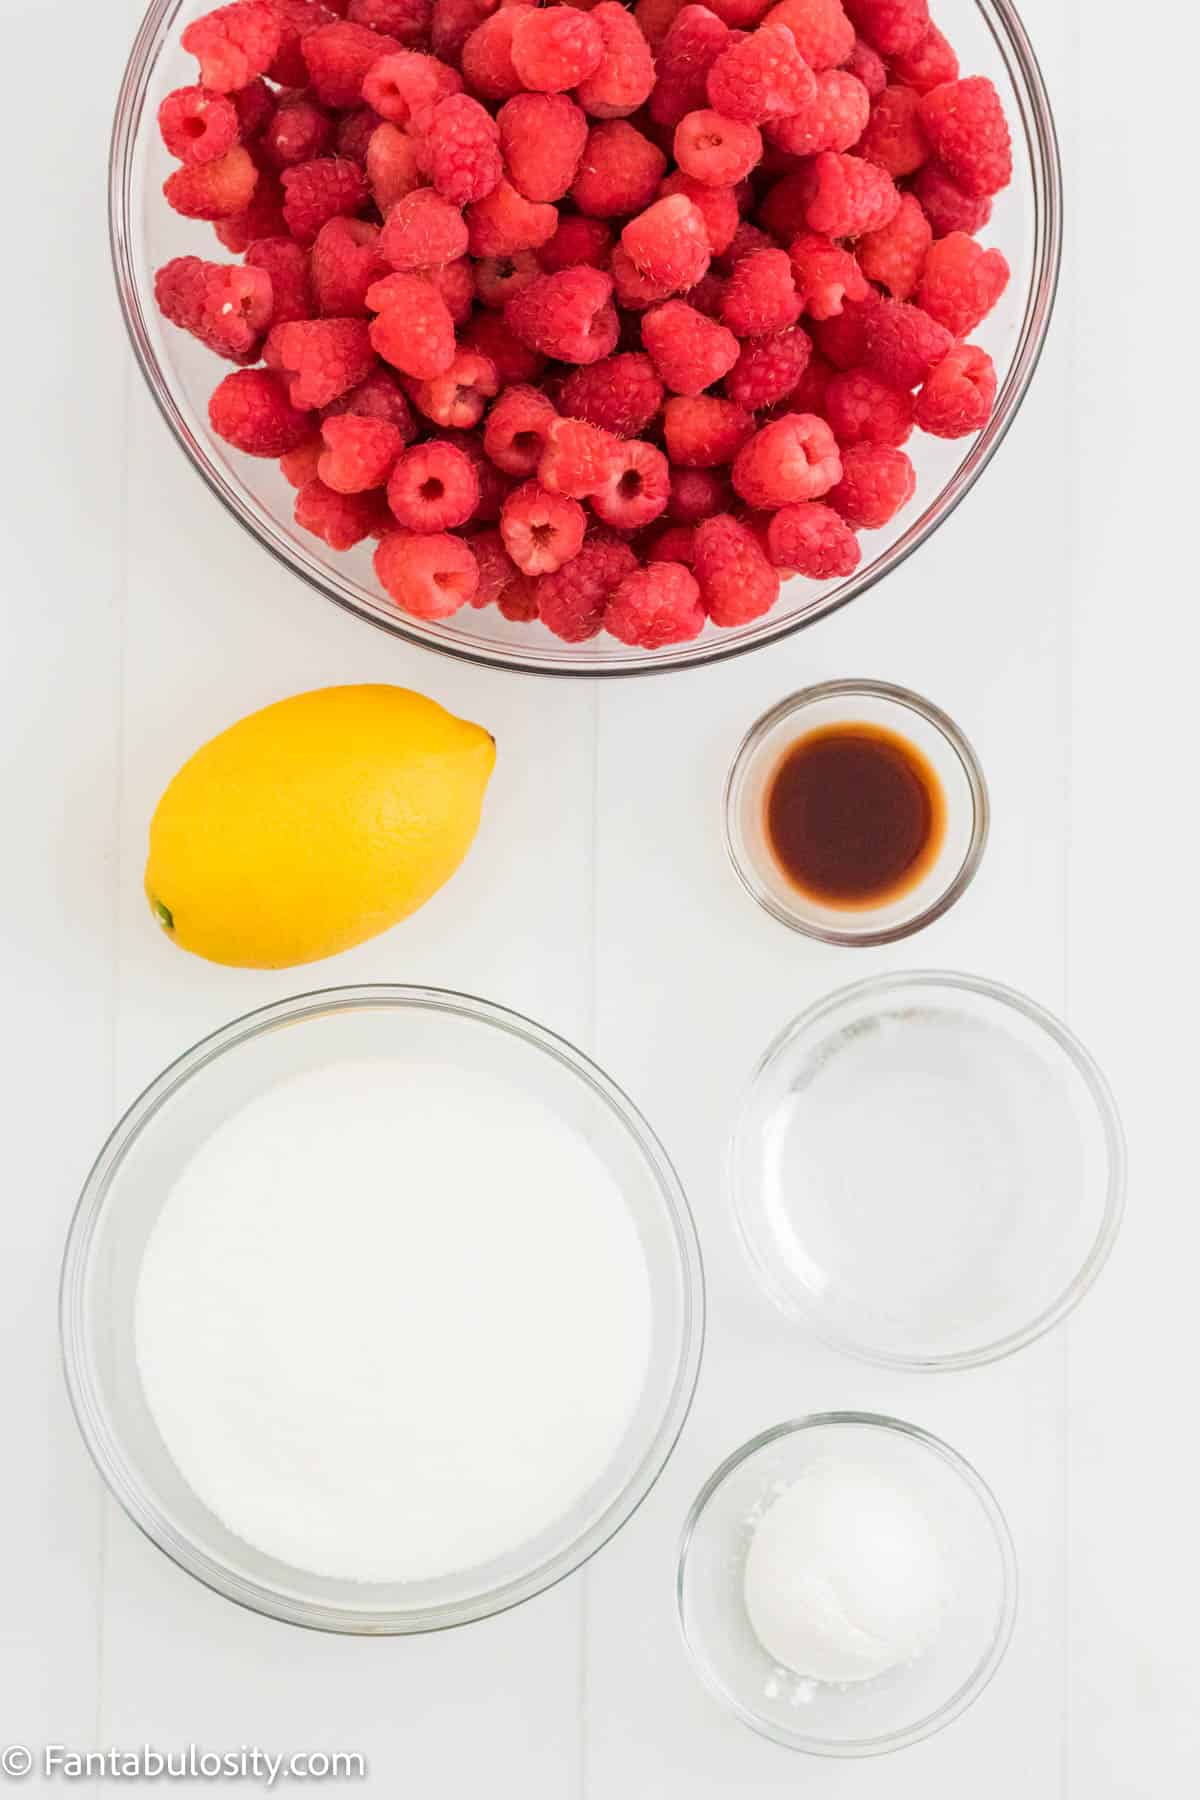 Photo of the ingredients for Instant Pot Raspberry jam including raspberries, lemons, sugar, water, cornstarch and vanilla extract